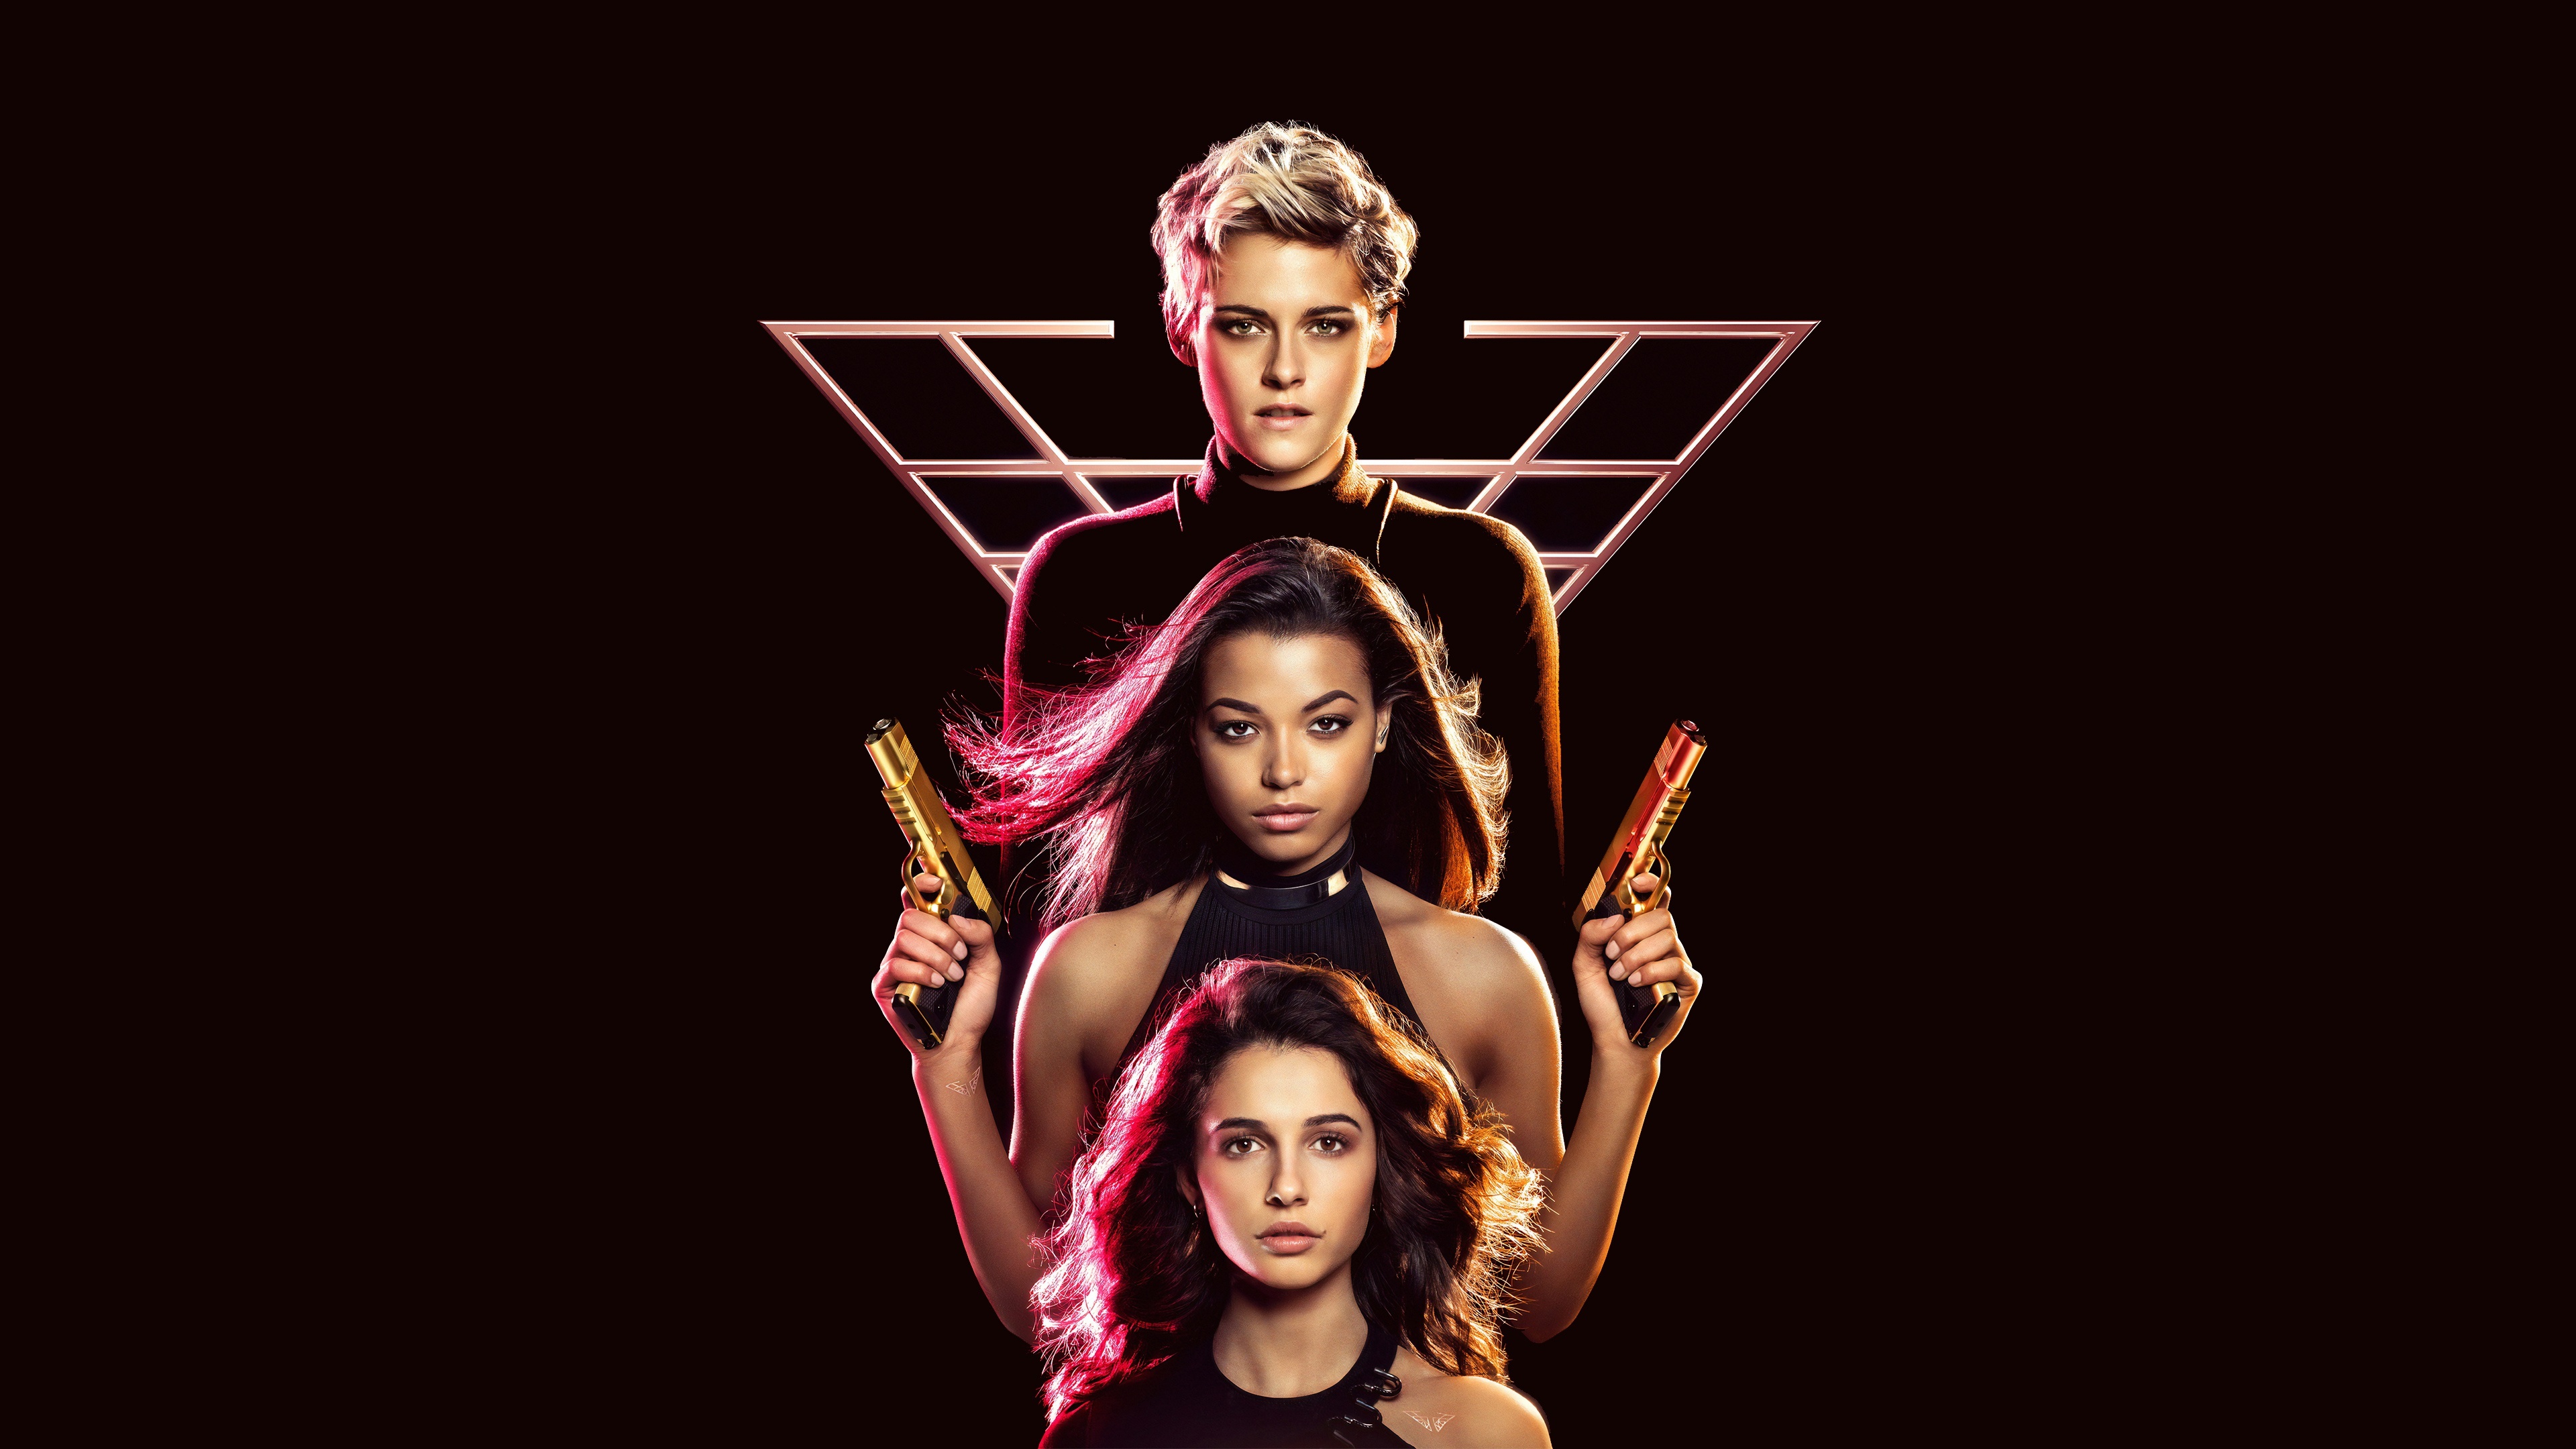 Charlie's Angels, Action-packed thriller, Strong female leads, Movie reboot, 3840x2160 4K Desktop